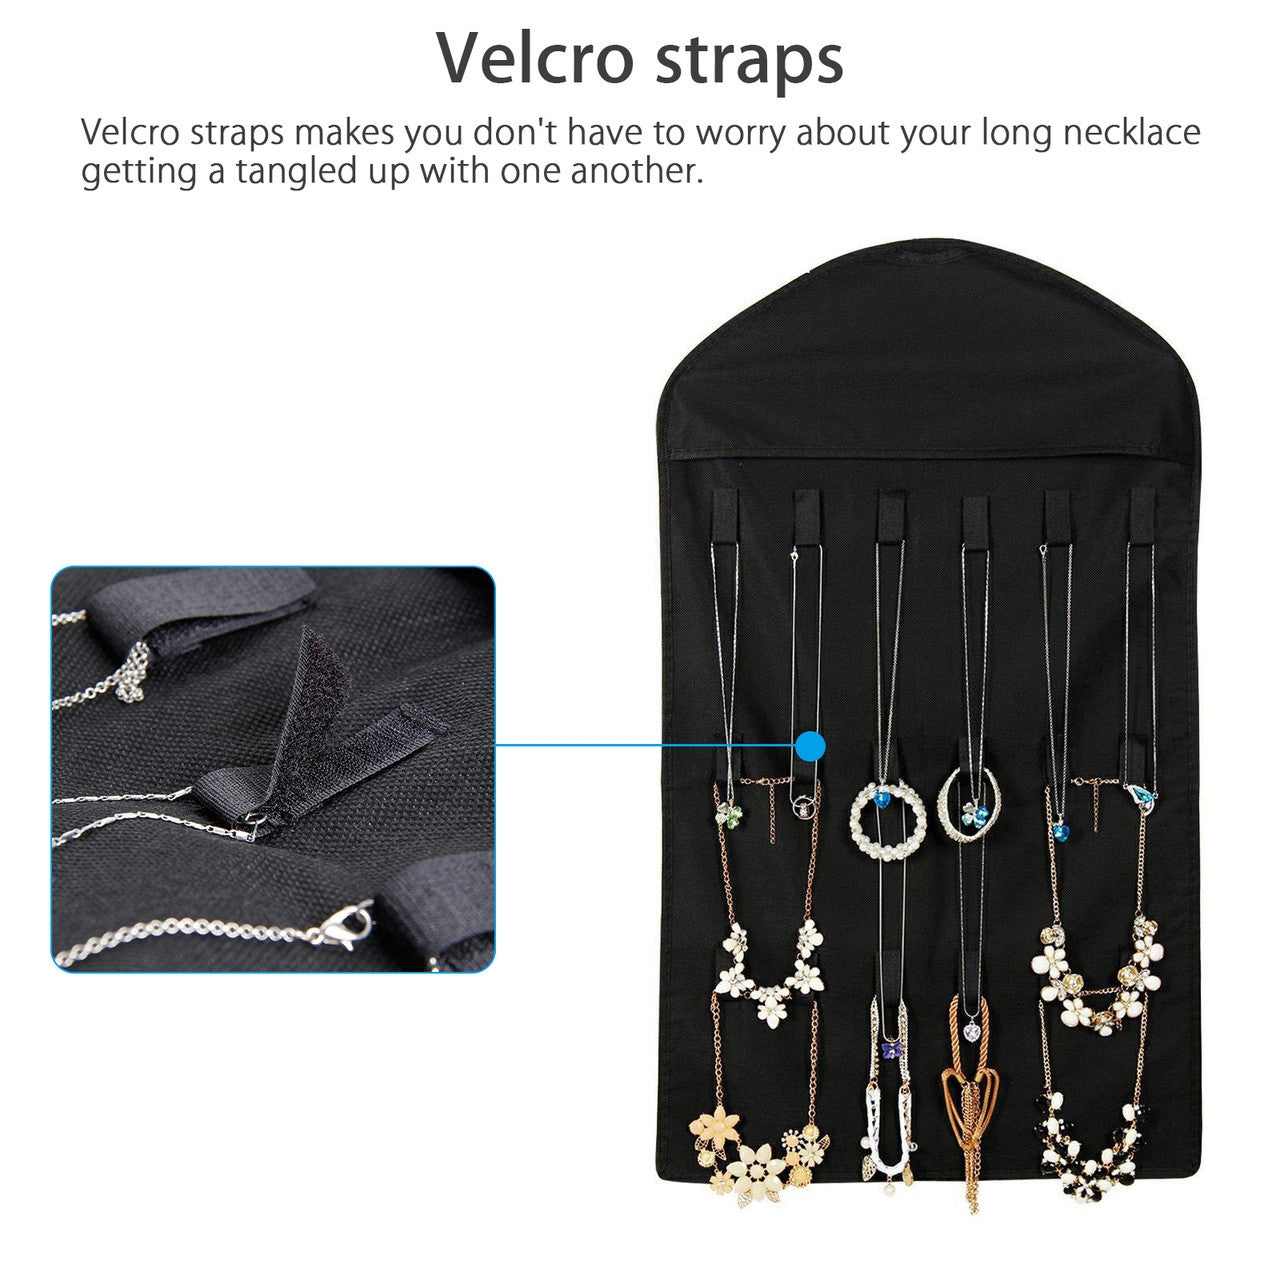 Hanging Bag, 32 Pockets Foldable Jewelry Necklace Hanging Bag Dual Sided Storage Organizer Display Case Bag with Clear PVC Window